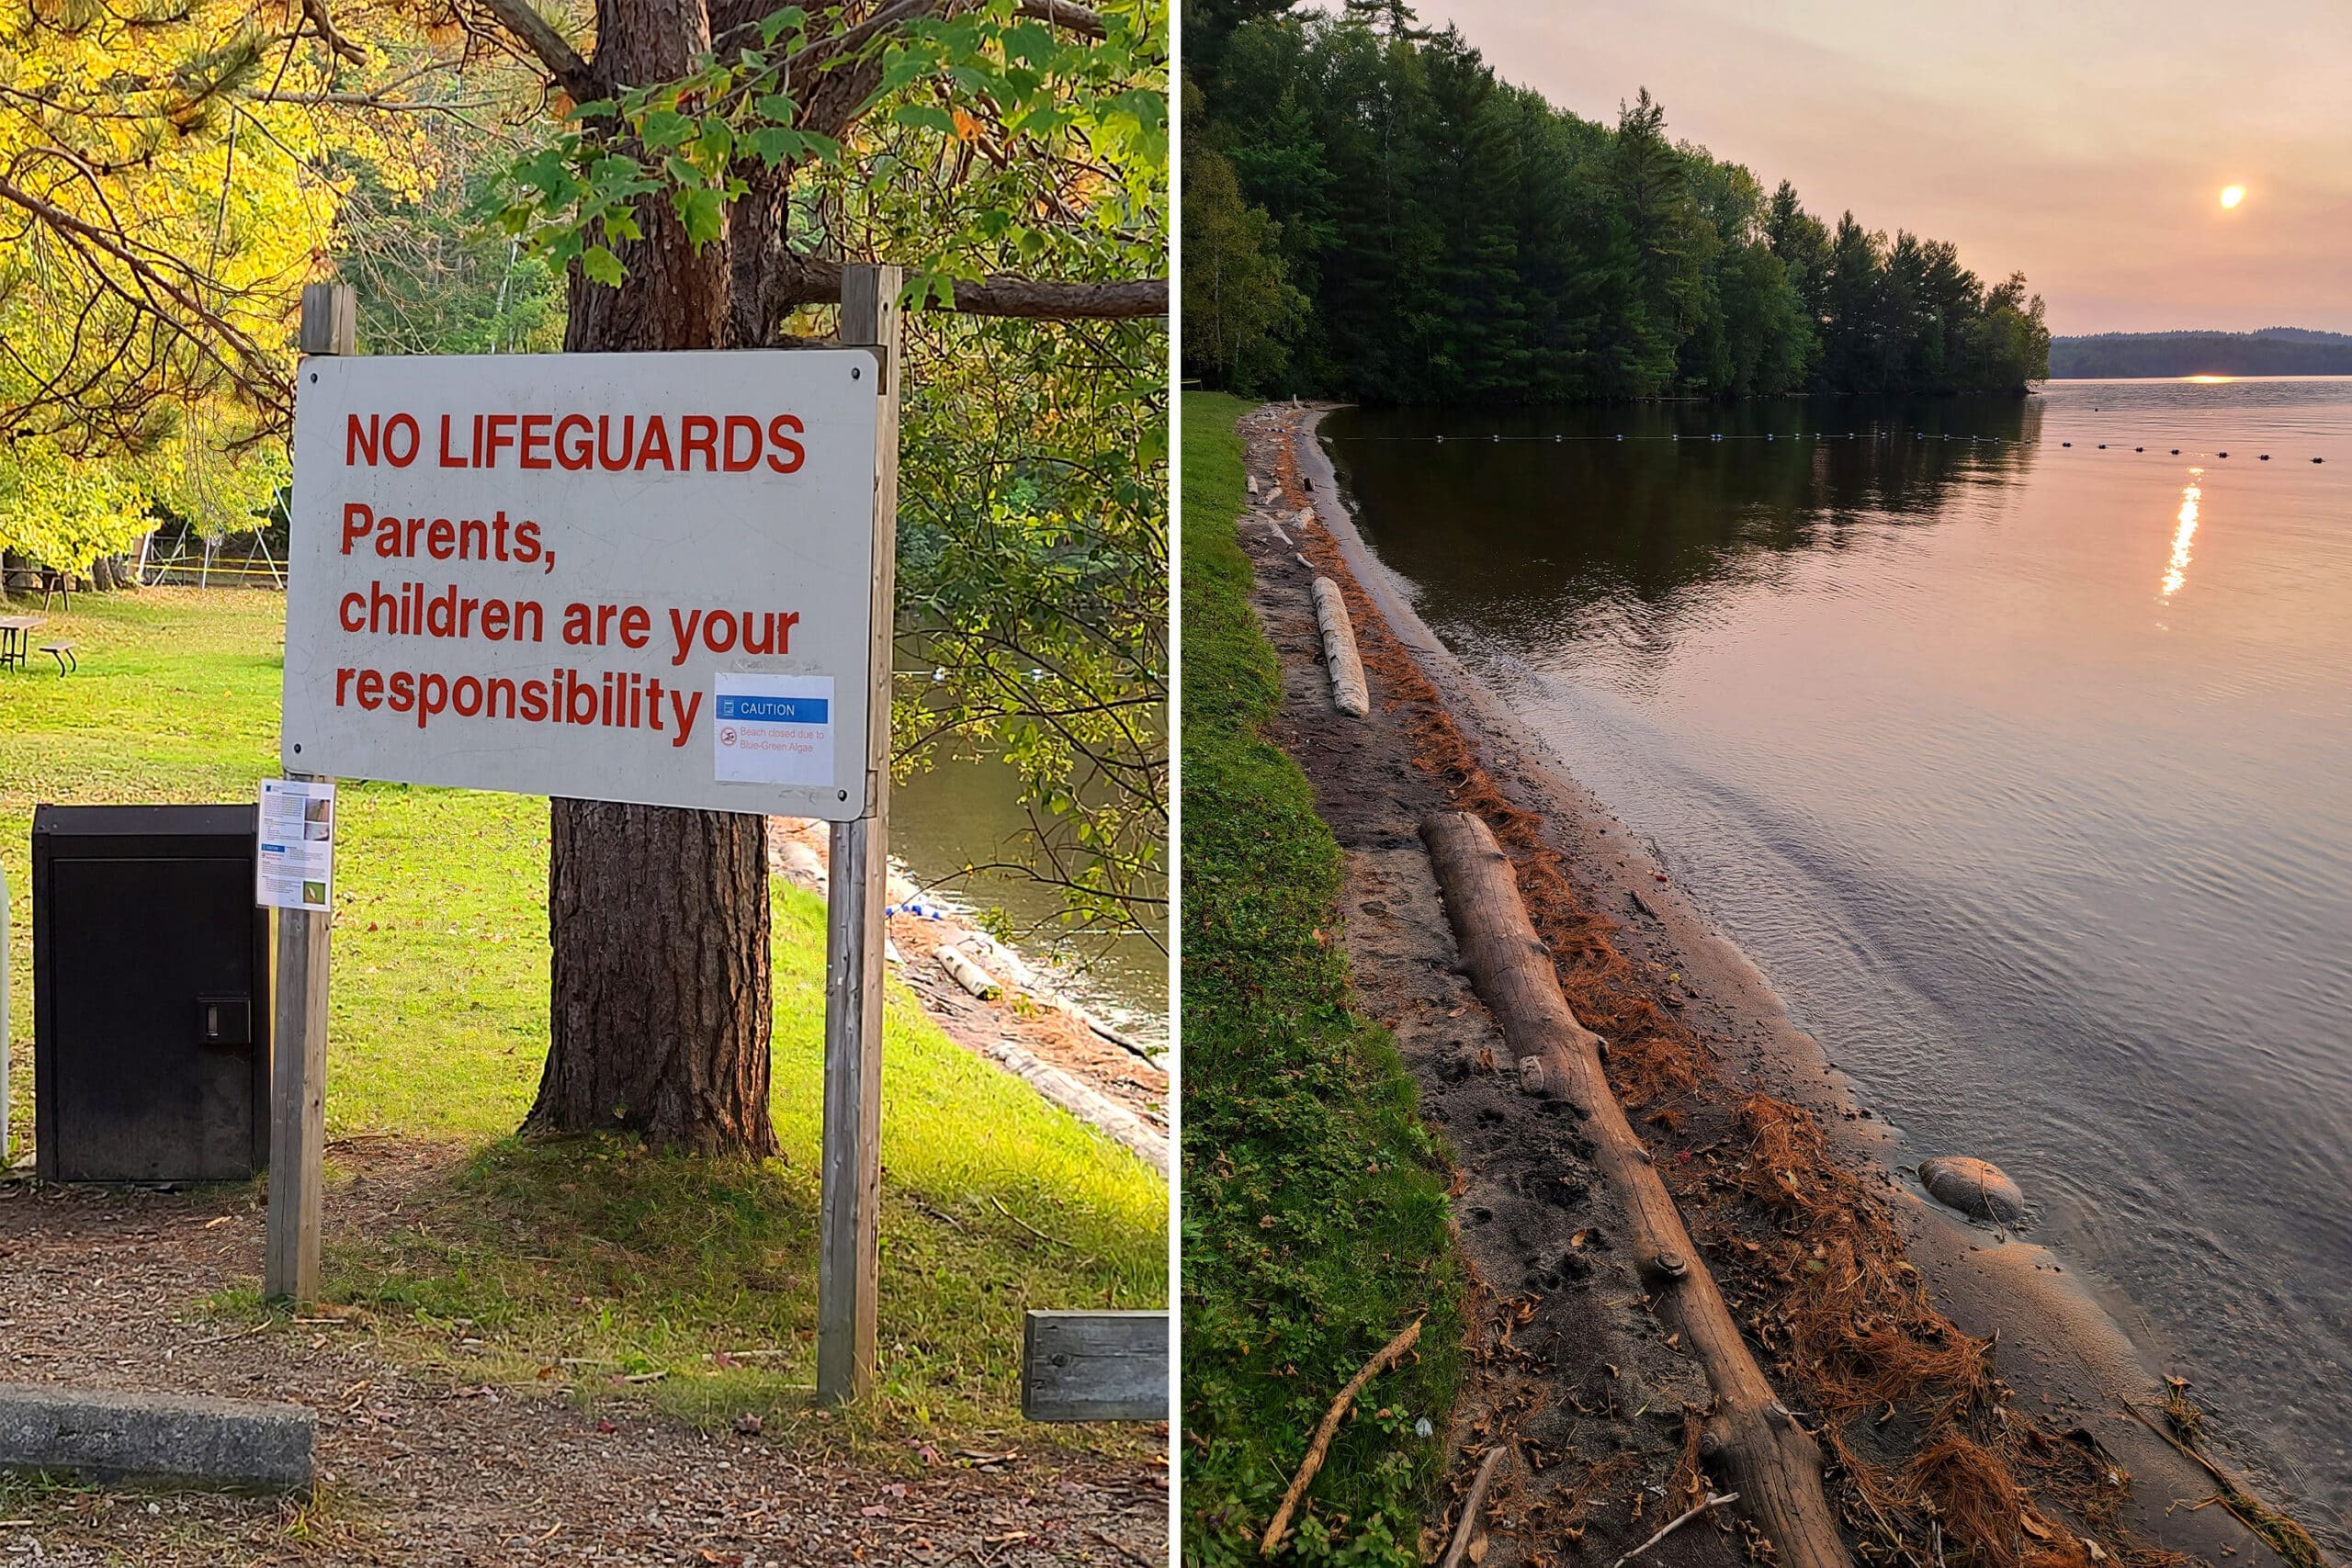 2 part image showing a narrow sandy beach, and a sign saying no lifeguards.